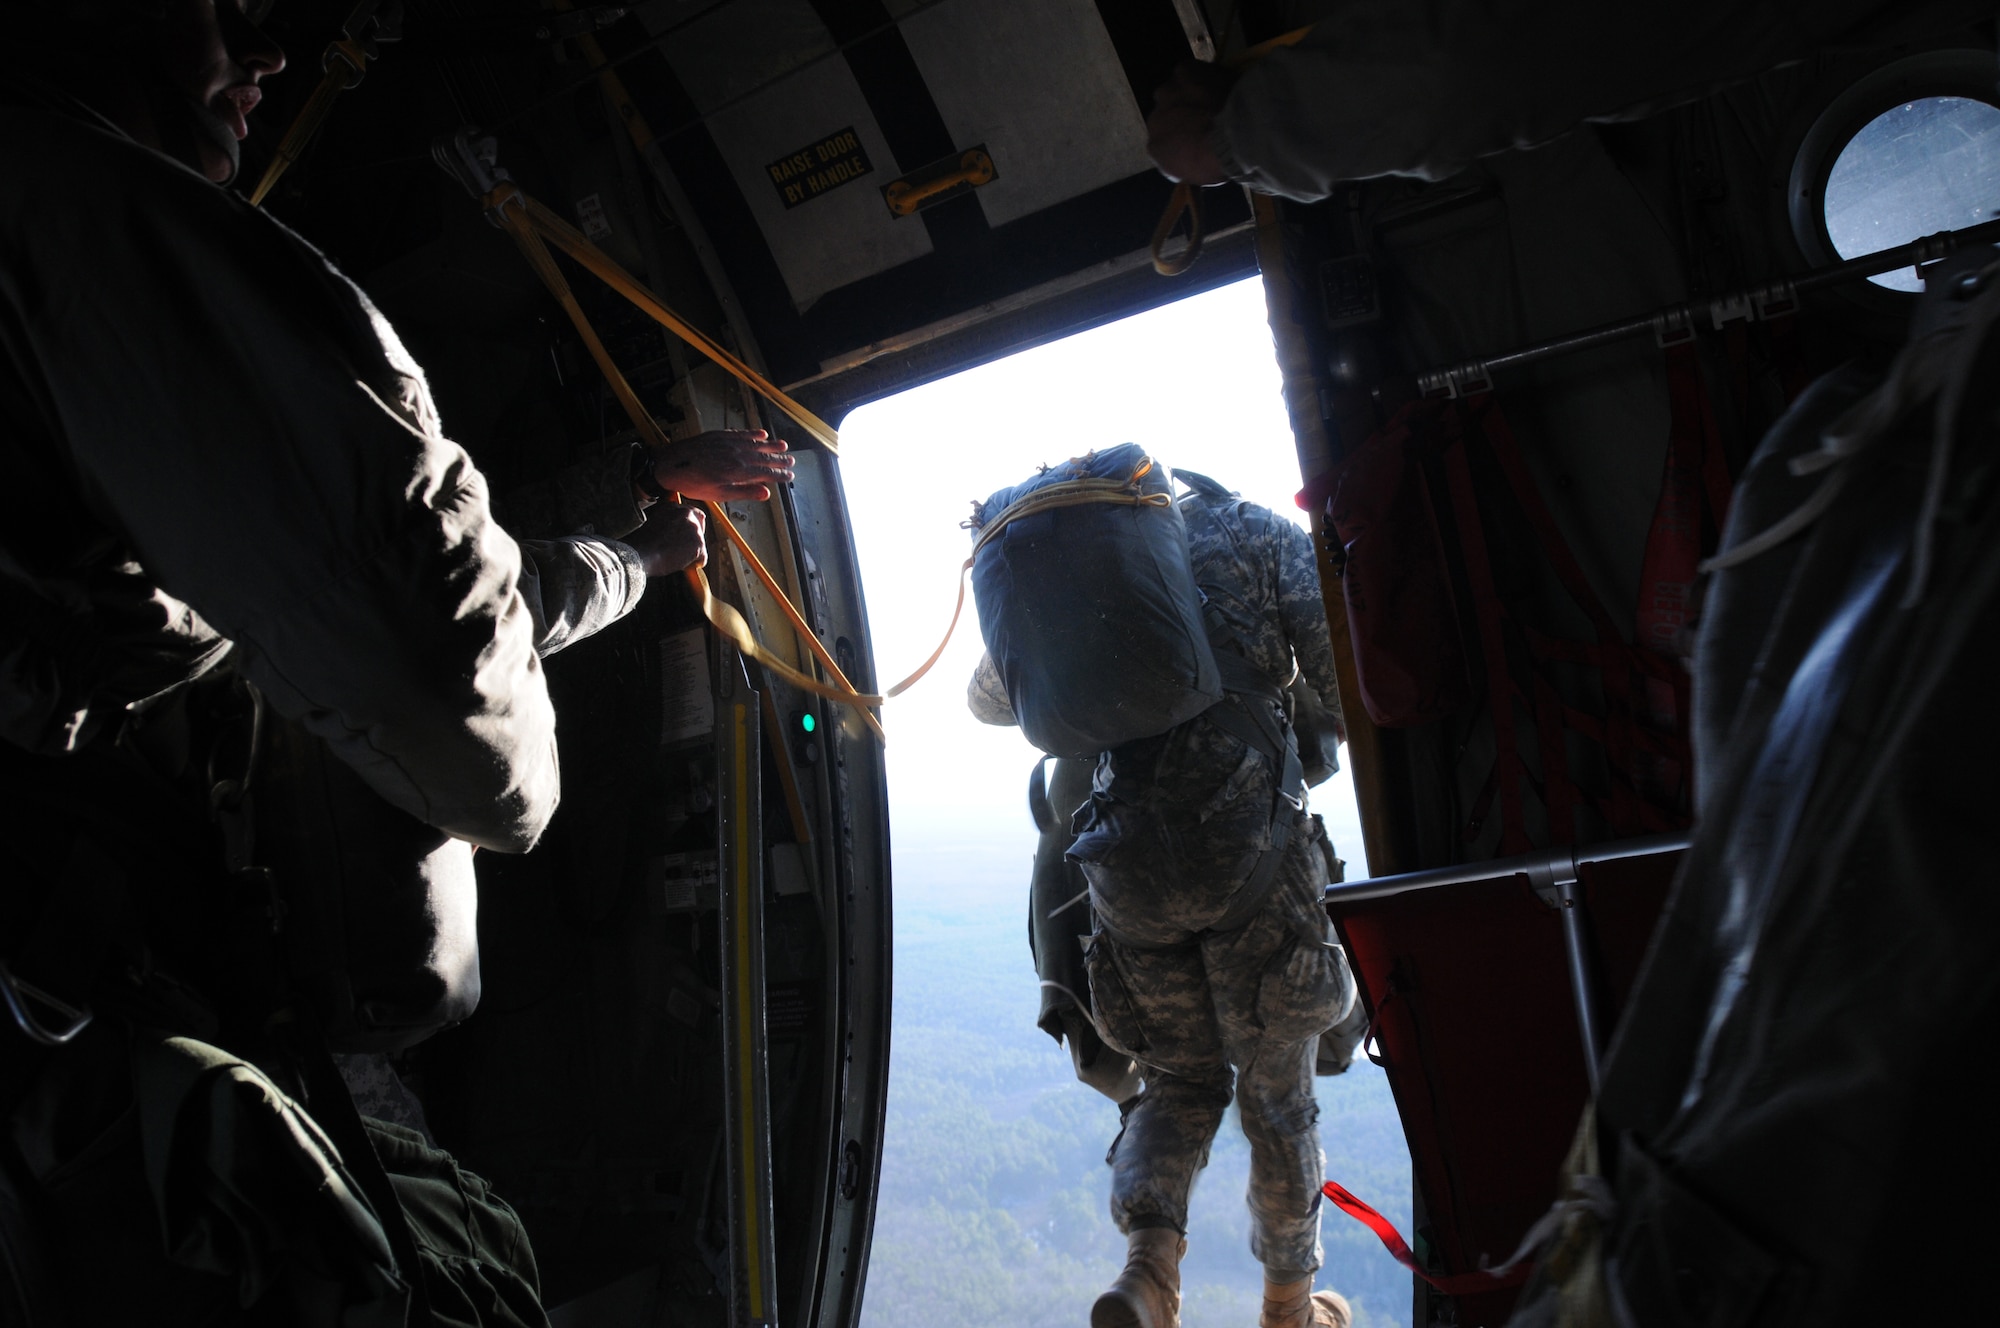 Army 3rd Ranger Battalion out of Fort Benning Georgia jump from the C-130 aircraft. This is the 107th Airlift Wing's first Army Ranger jump training operation. (AF Photo/Senior Master Sgt. Ray Lloyd) 